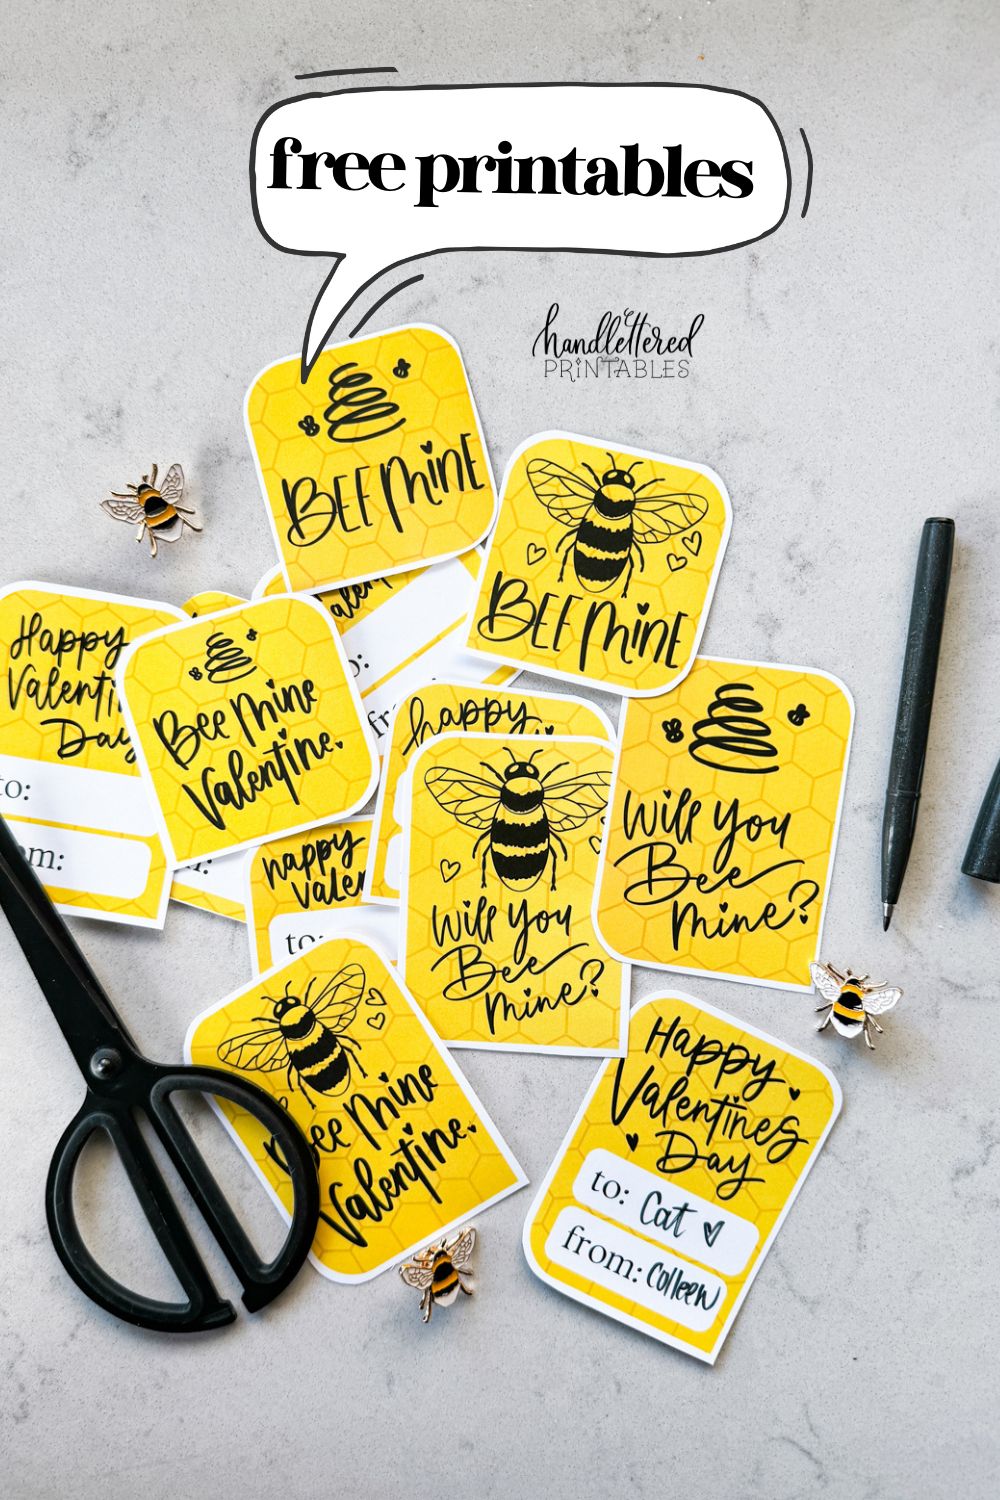 text over image reads 'free printables' image of bee themed valentines cards on countertop valentines cards read: bee mine, will you bee mine, and bee mine valentine with illustrations of a bee and of a line art bee hive. reverse has space for names and says 'happy valentines day'. all hand lettered in black ink with yellow honeycomb background